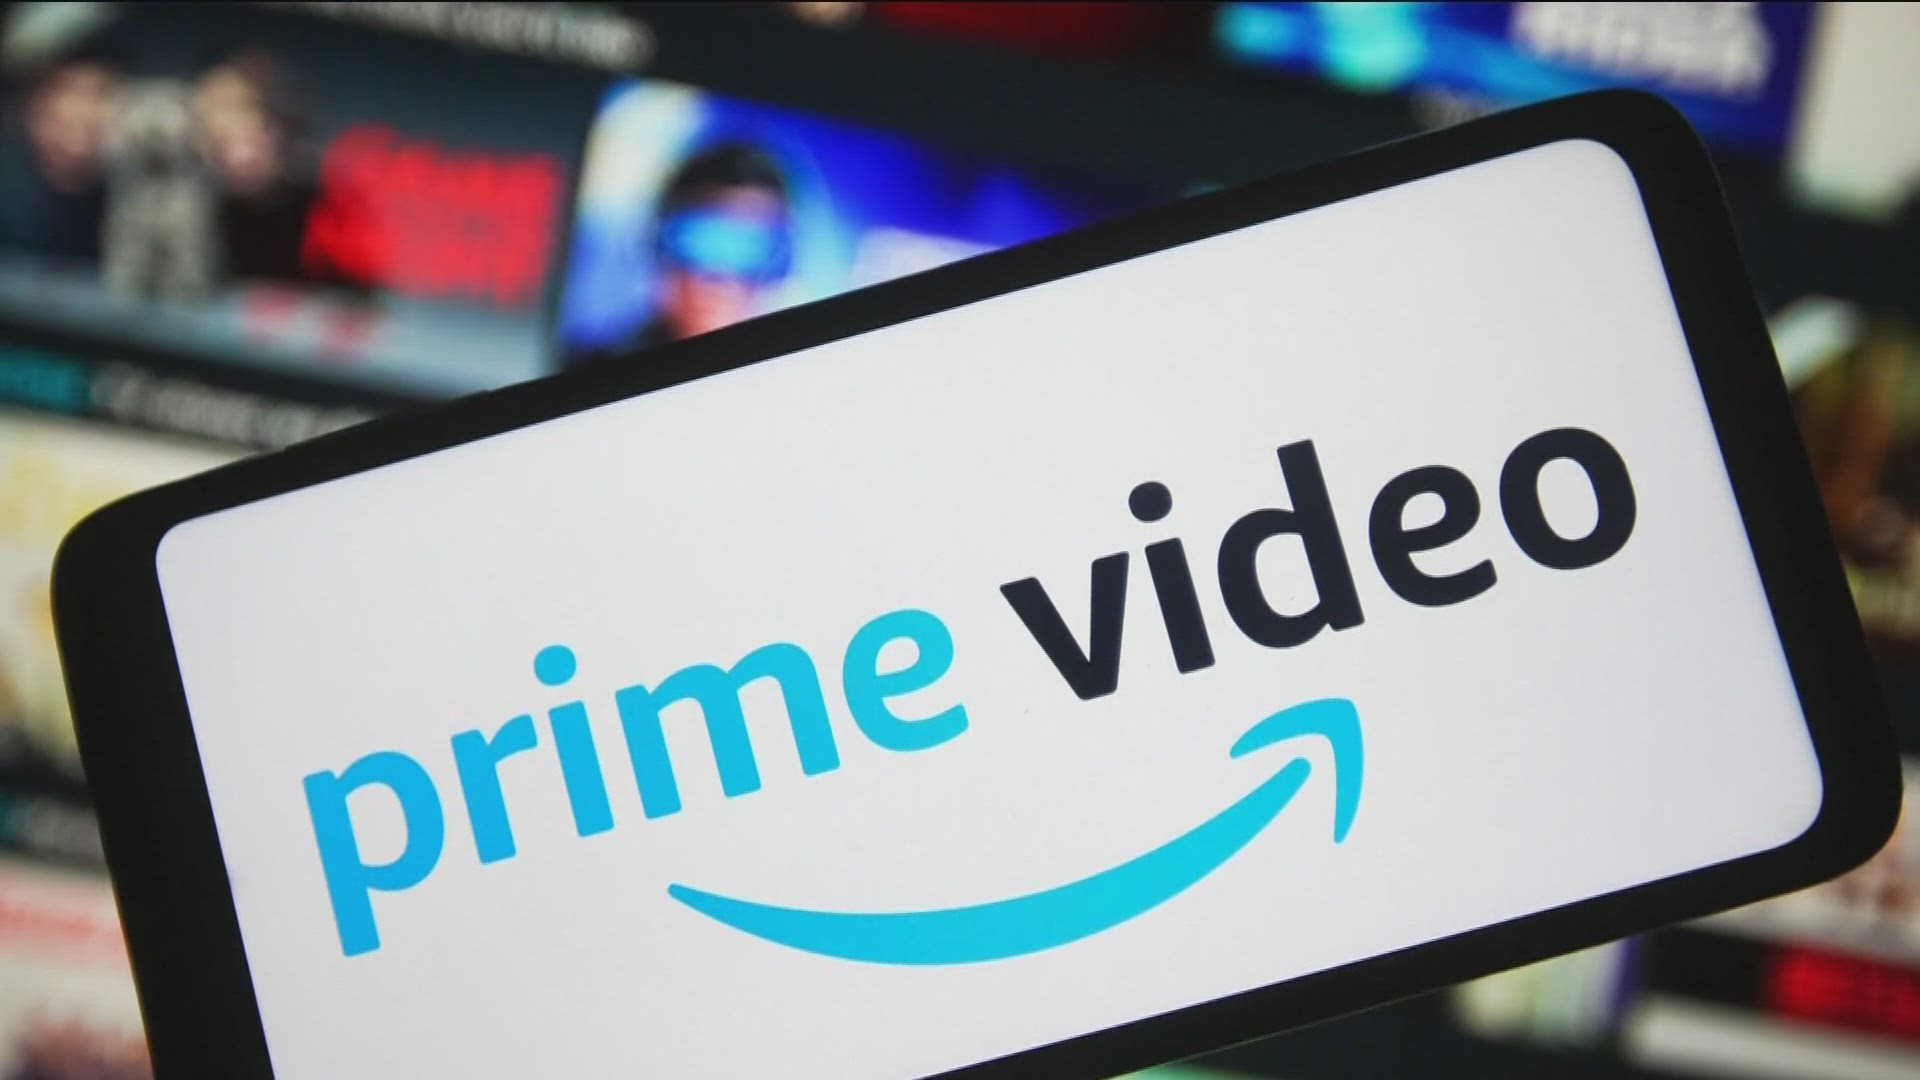 The Federal Trade Commission accuses Amazon of using deceptive user-interface designs, making it easy to sign up for Prime, yet extremely difficult to cancel.